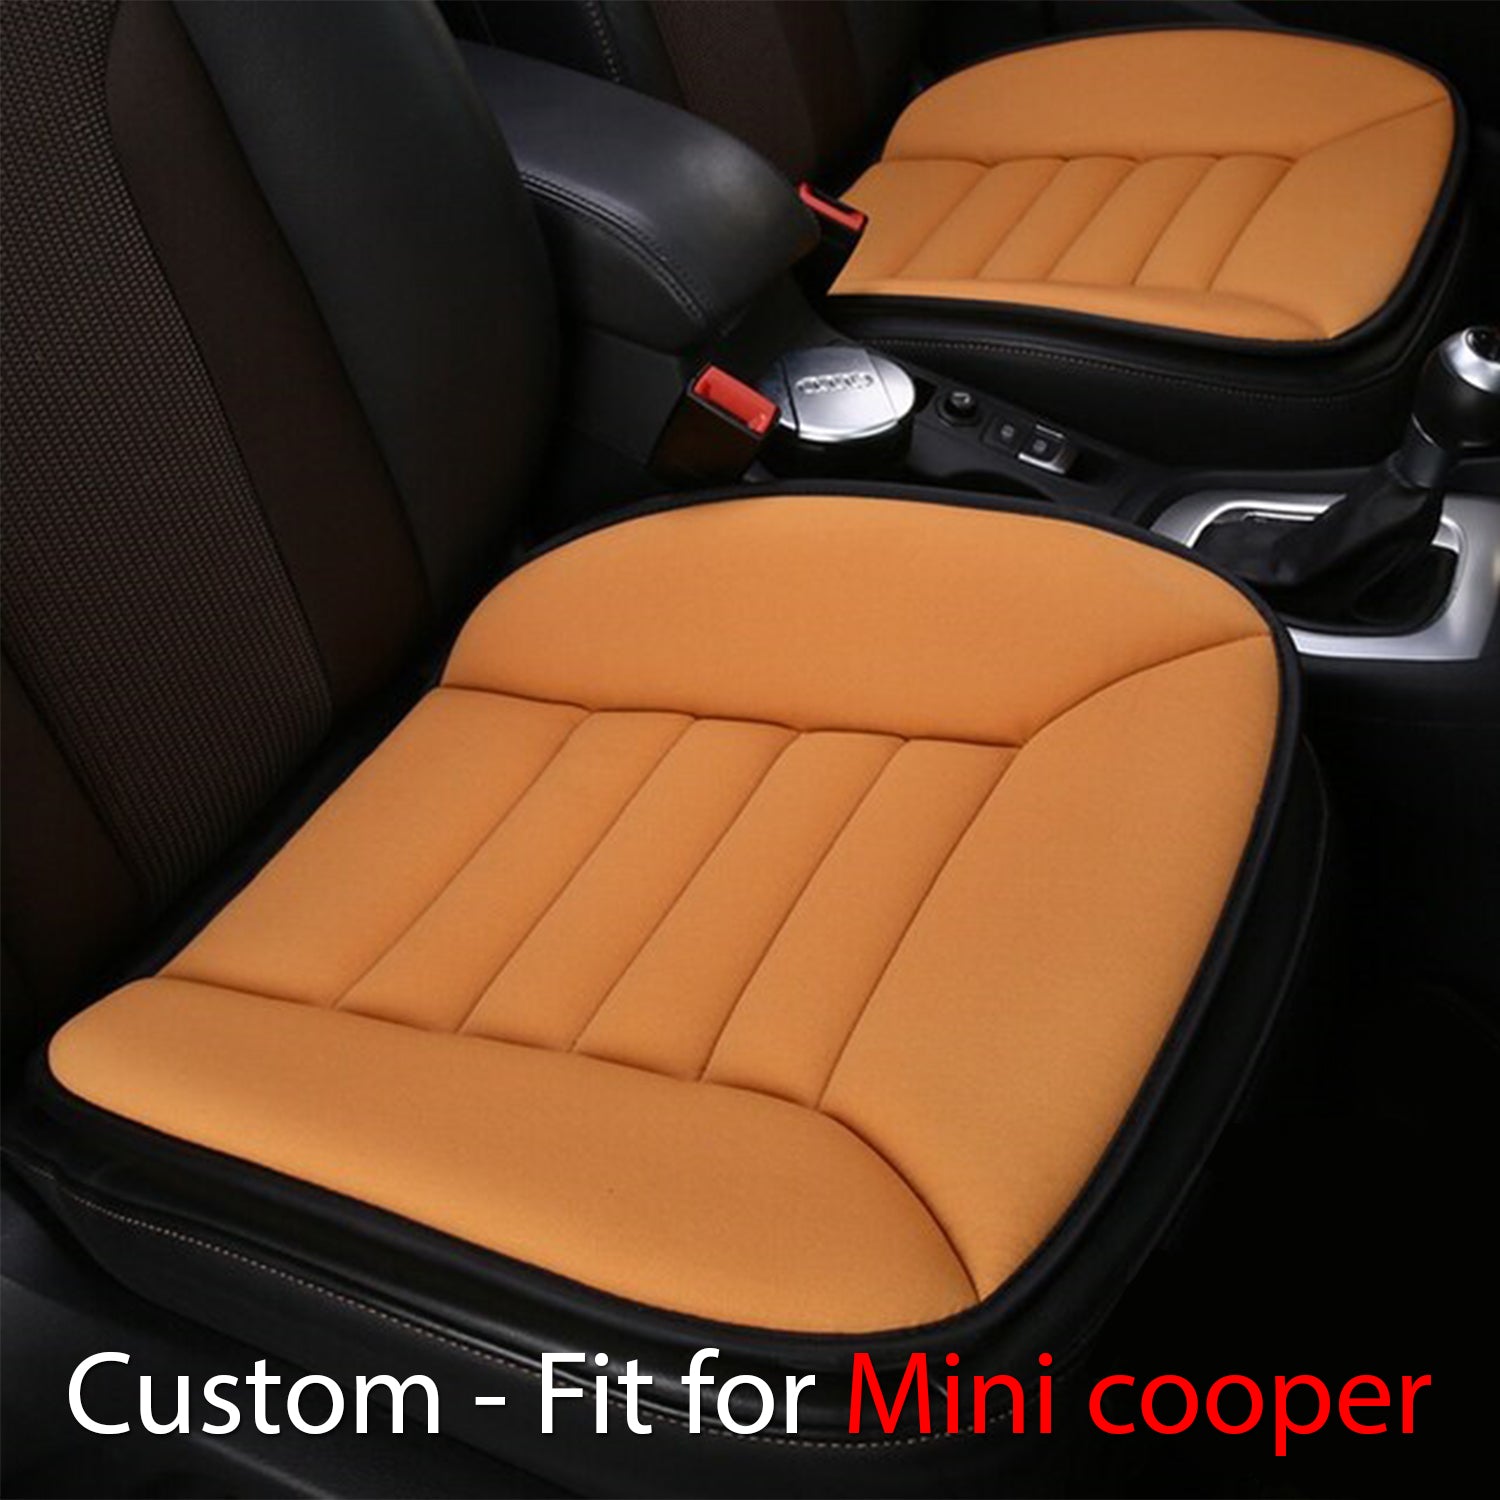 Car Seat Cushion with 1.2inch Comfort Memory Foam, Custom-Fit For Car, Seat Cushion for Car and Office Chair DLMT247